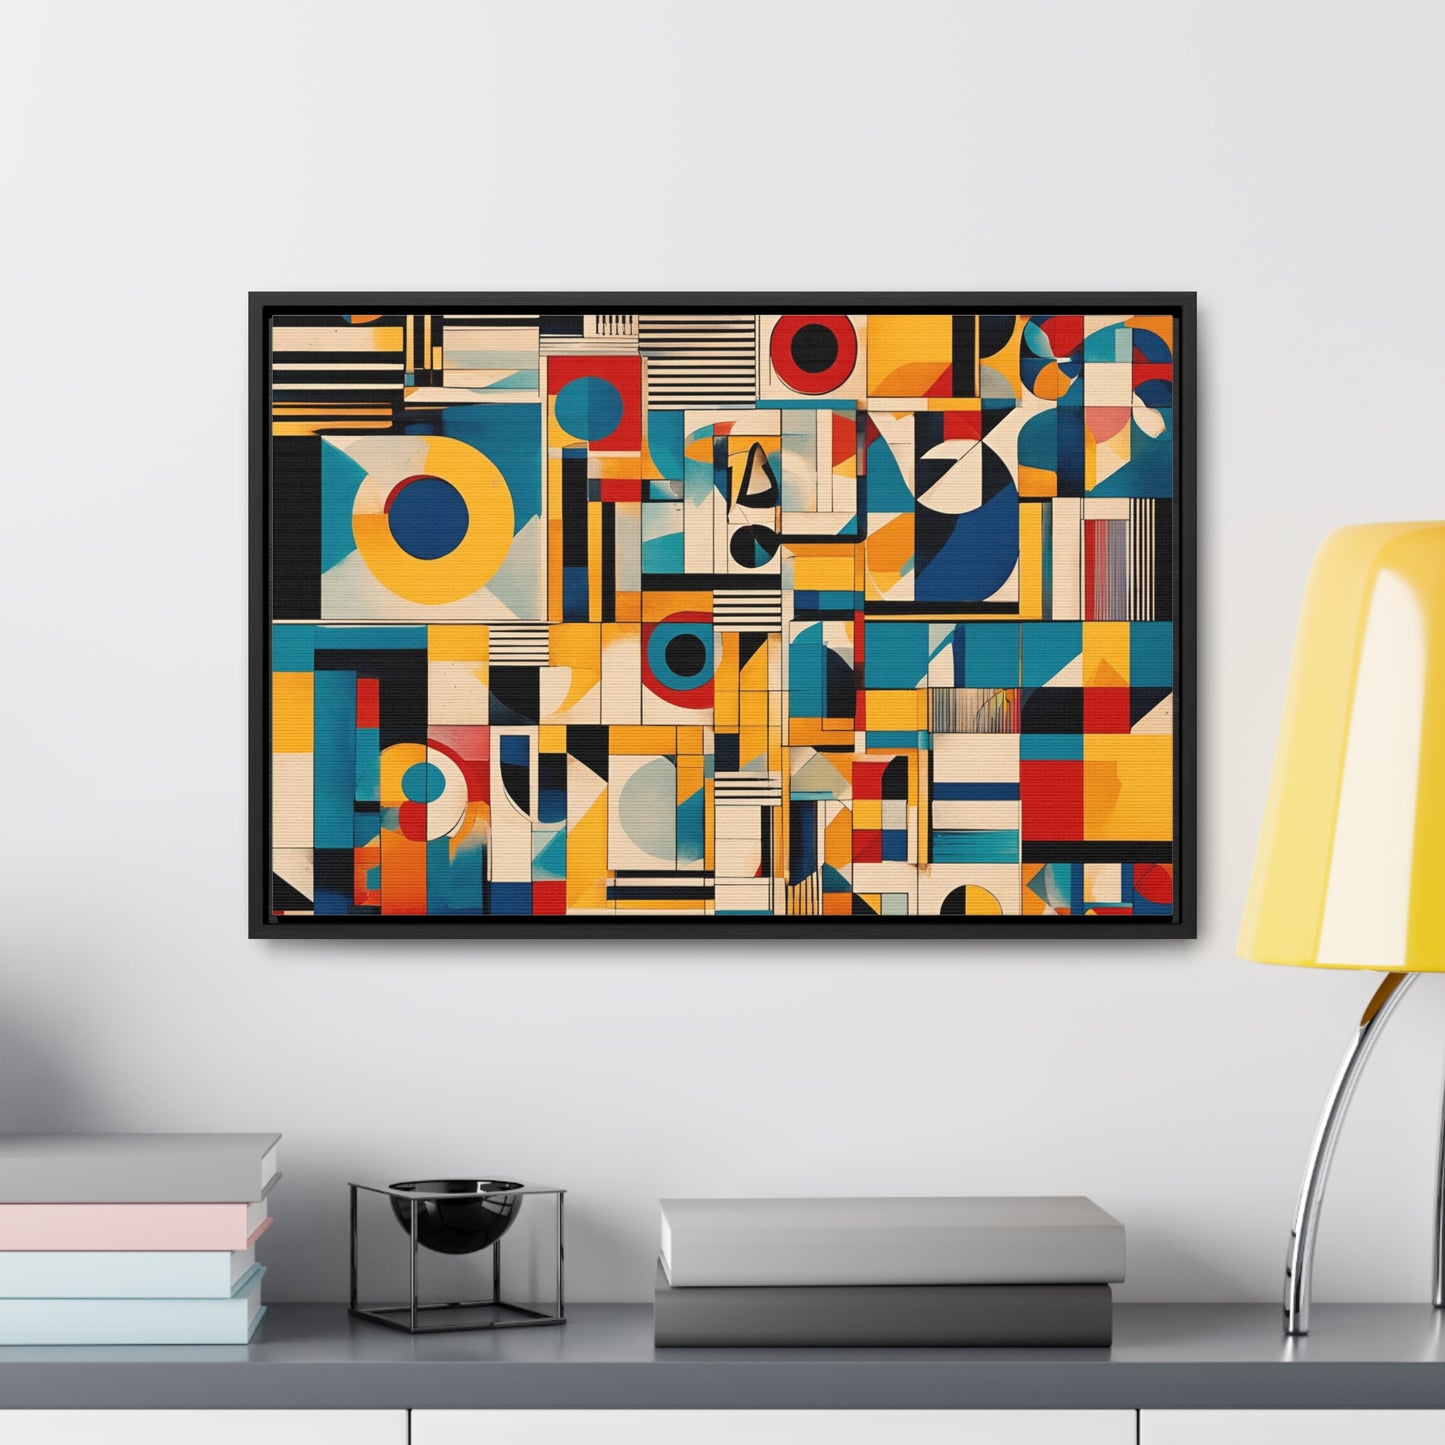 Bold Mid Century Modern Wall Art Print on Canvas in a Floating Frame 24x16